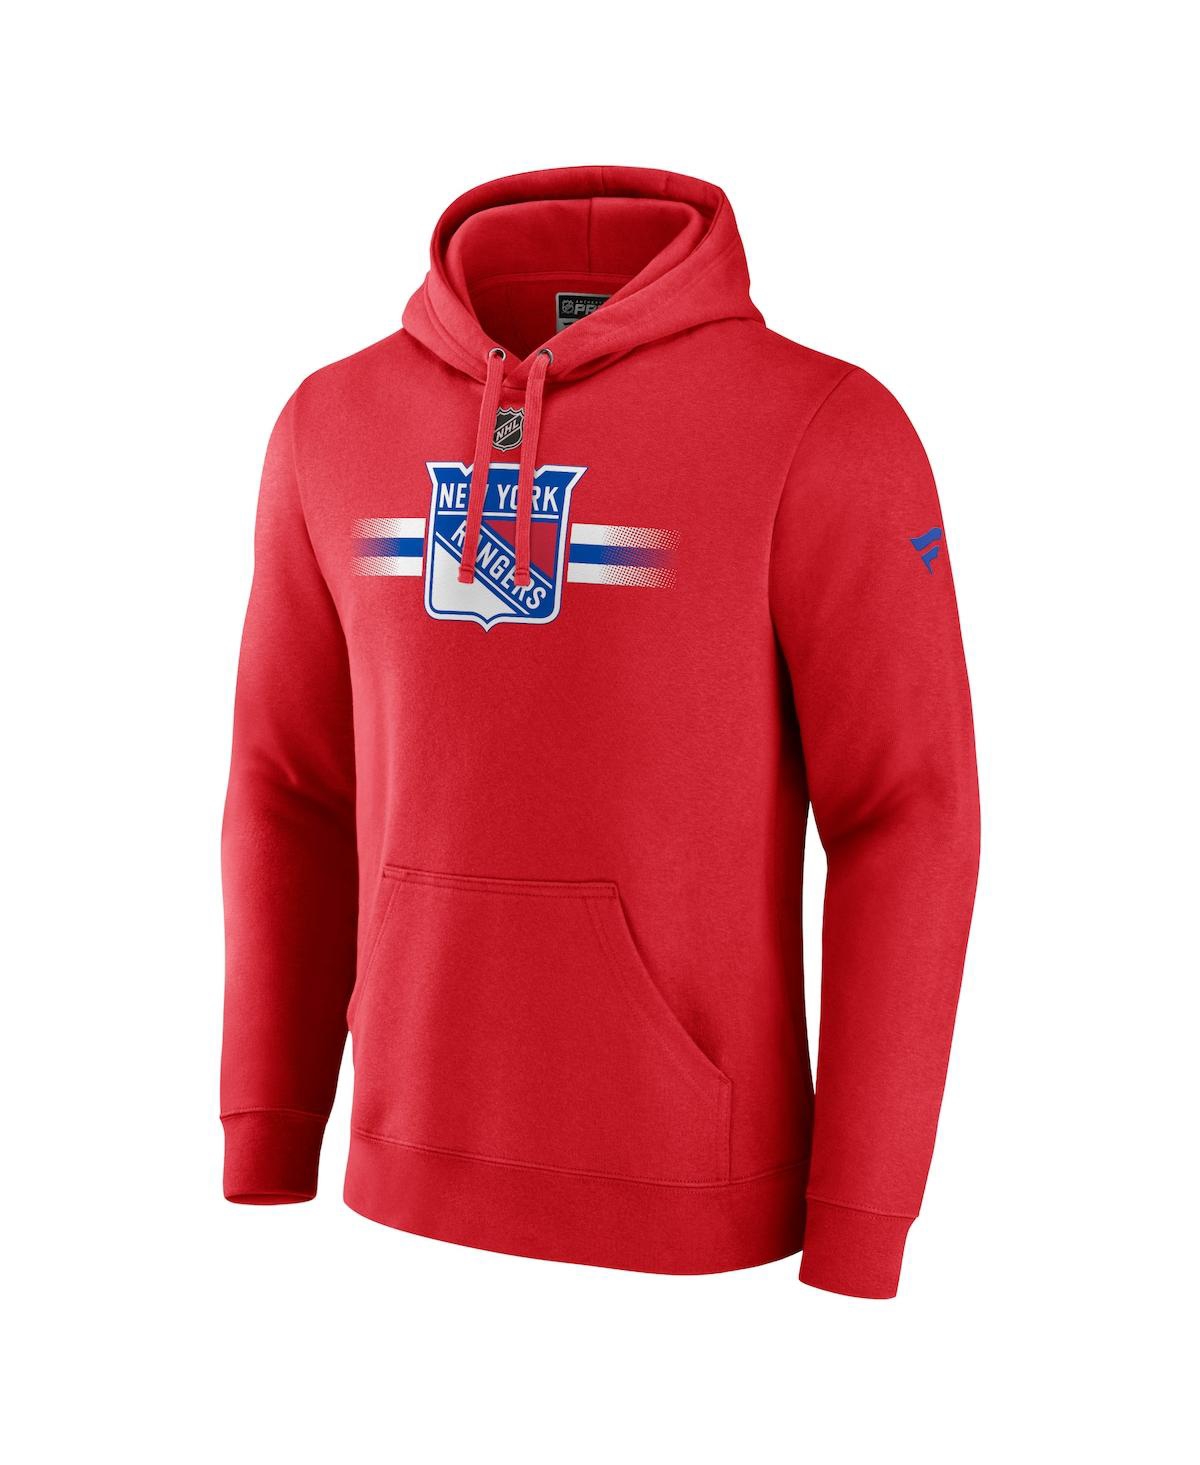 Shop Fanatics Men's  Red New York Rangers Authentic Pro Secondary Pullover Hoodie